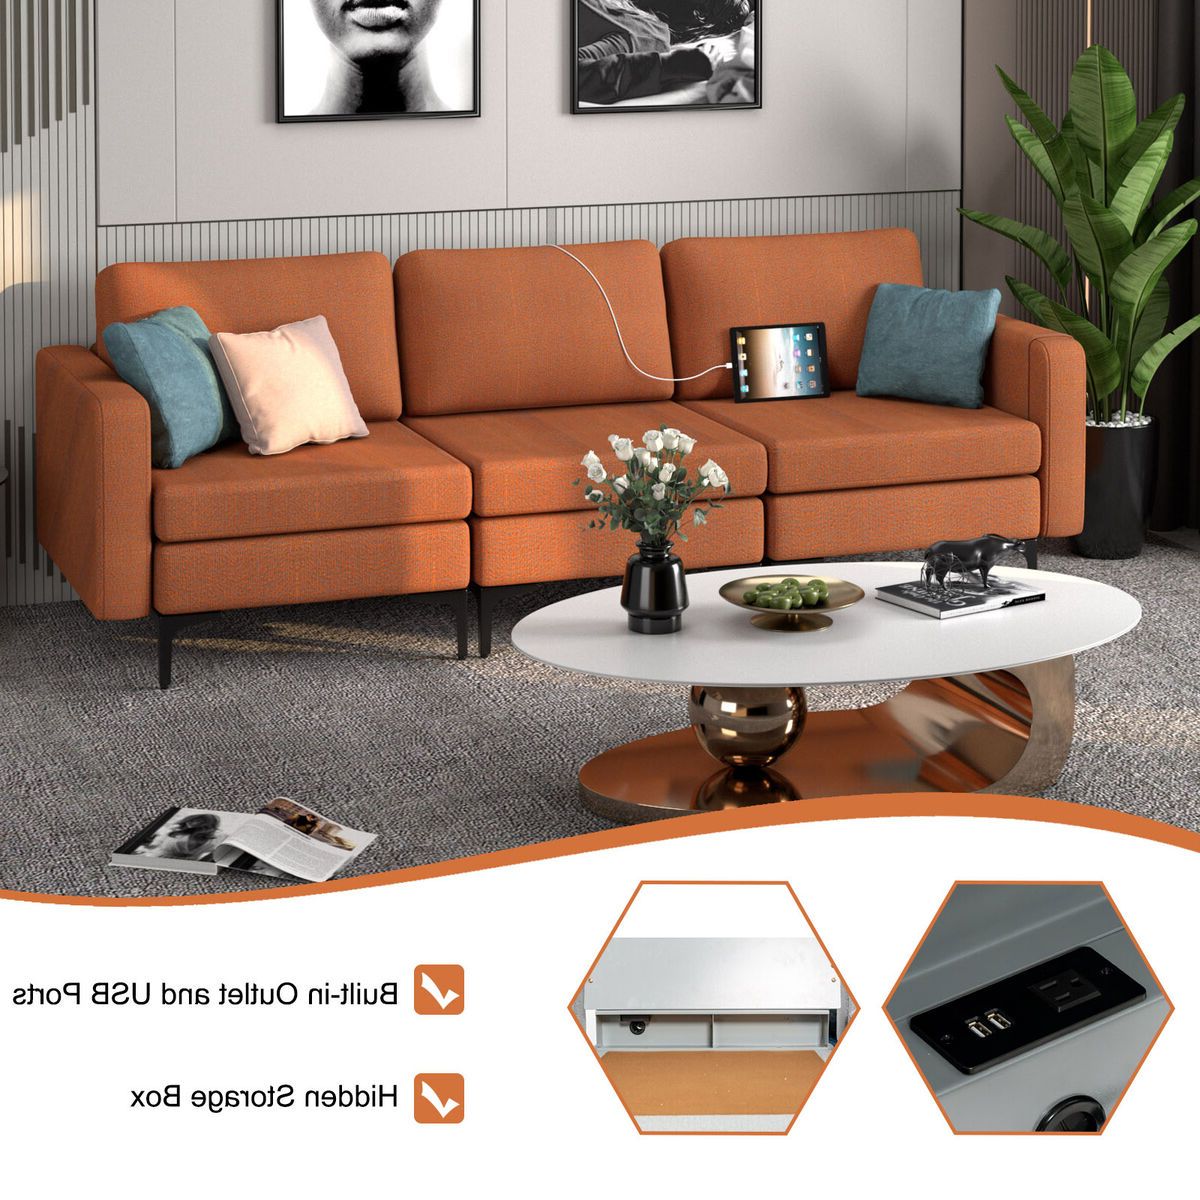 Modular L Shaped 3 Seat Sofa Couch W/ Seat Cushion & Socket & 2 Ubs  Ports Orange | Ebay Within 3 Seat L Shape Sofa Couches With 2 Usb Ports (Gallery 16 of 20)